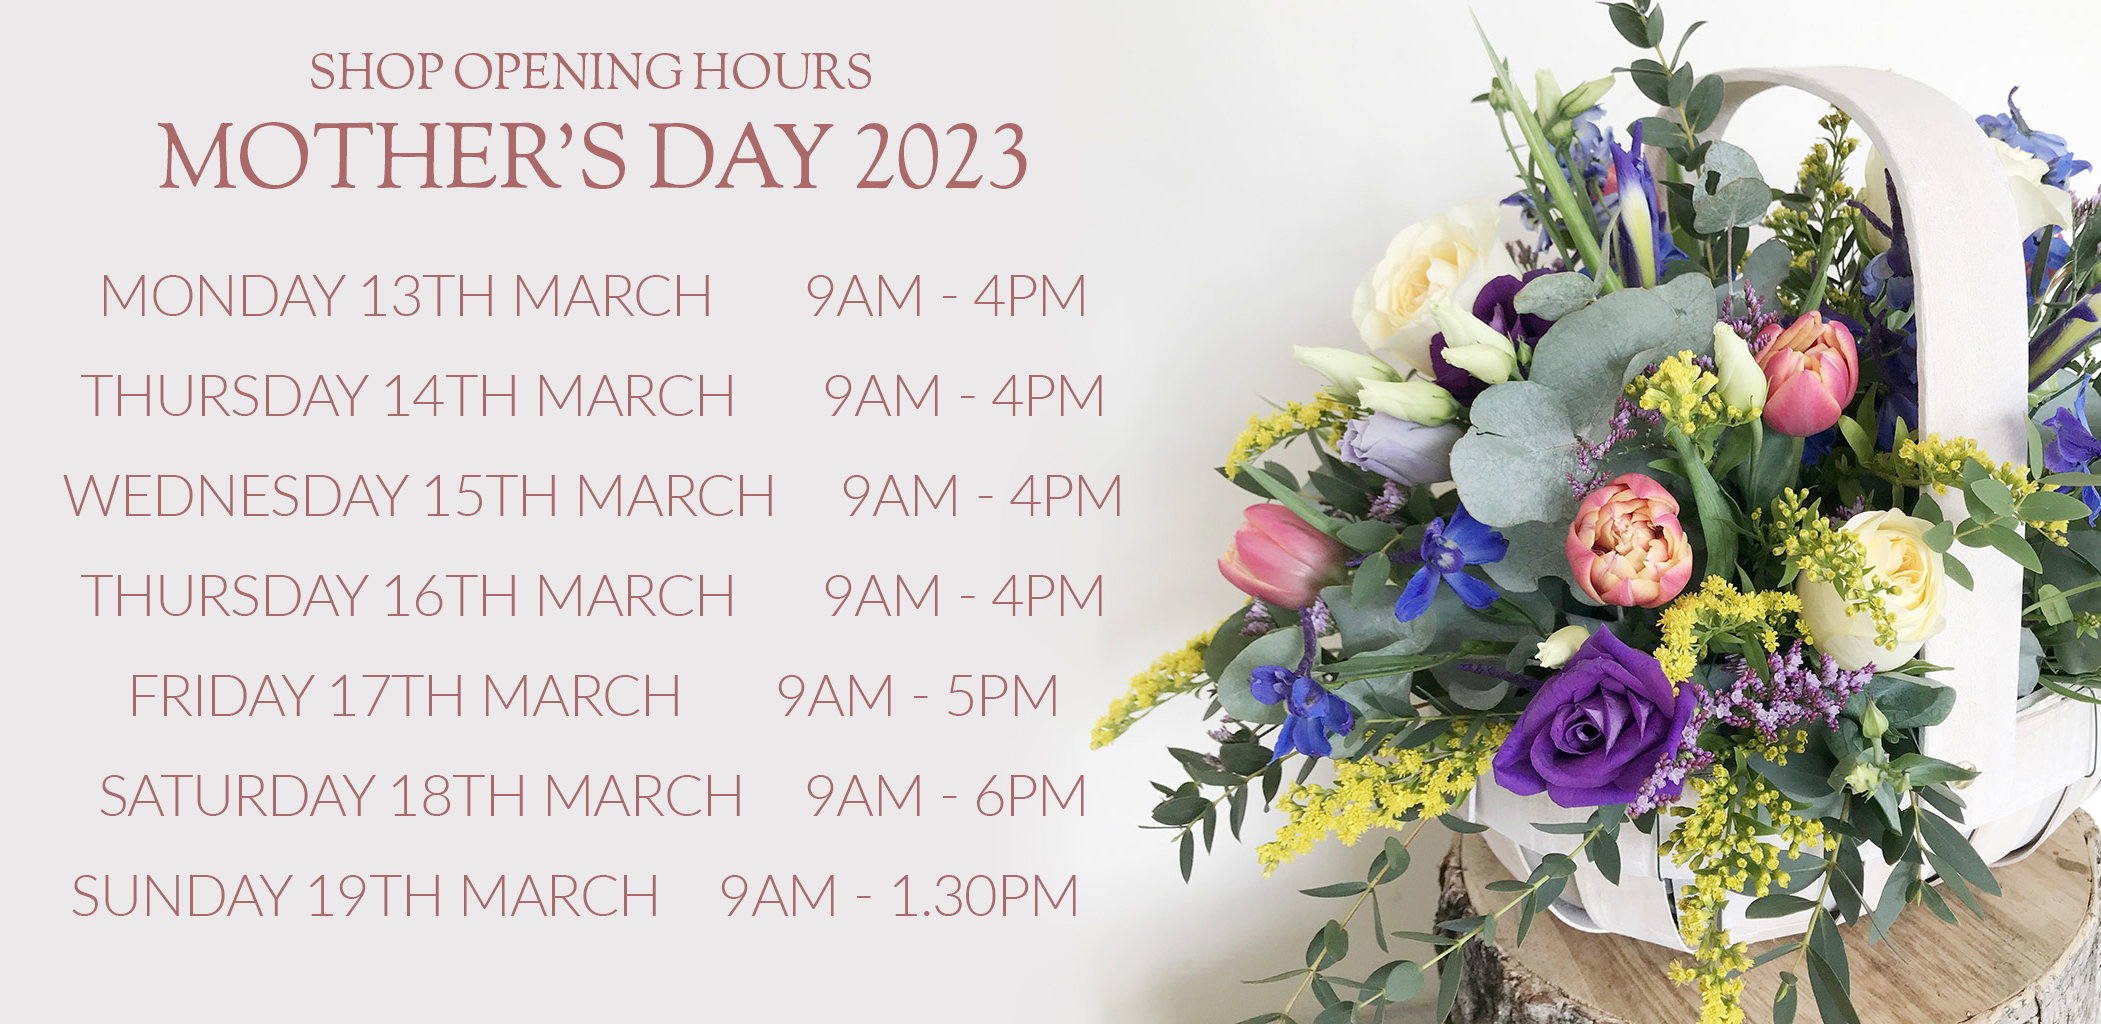 Mothers Day Shop Opening Hours 2023